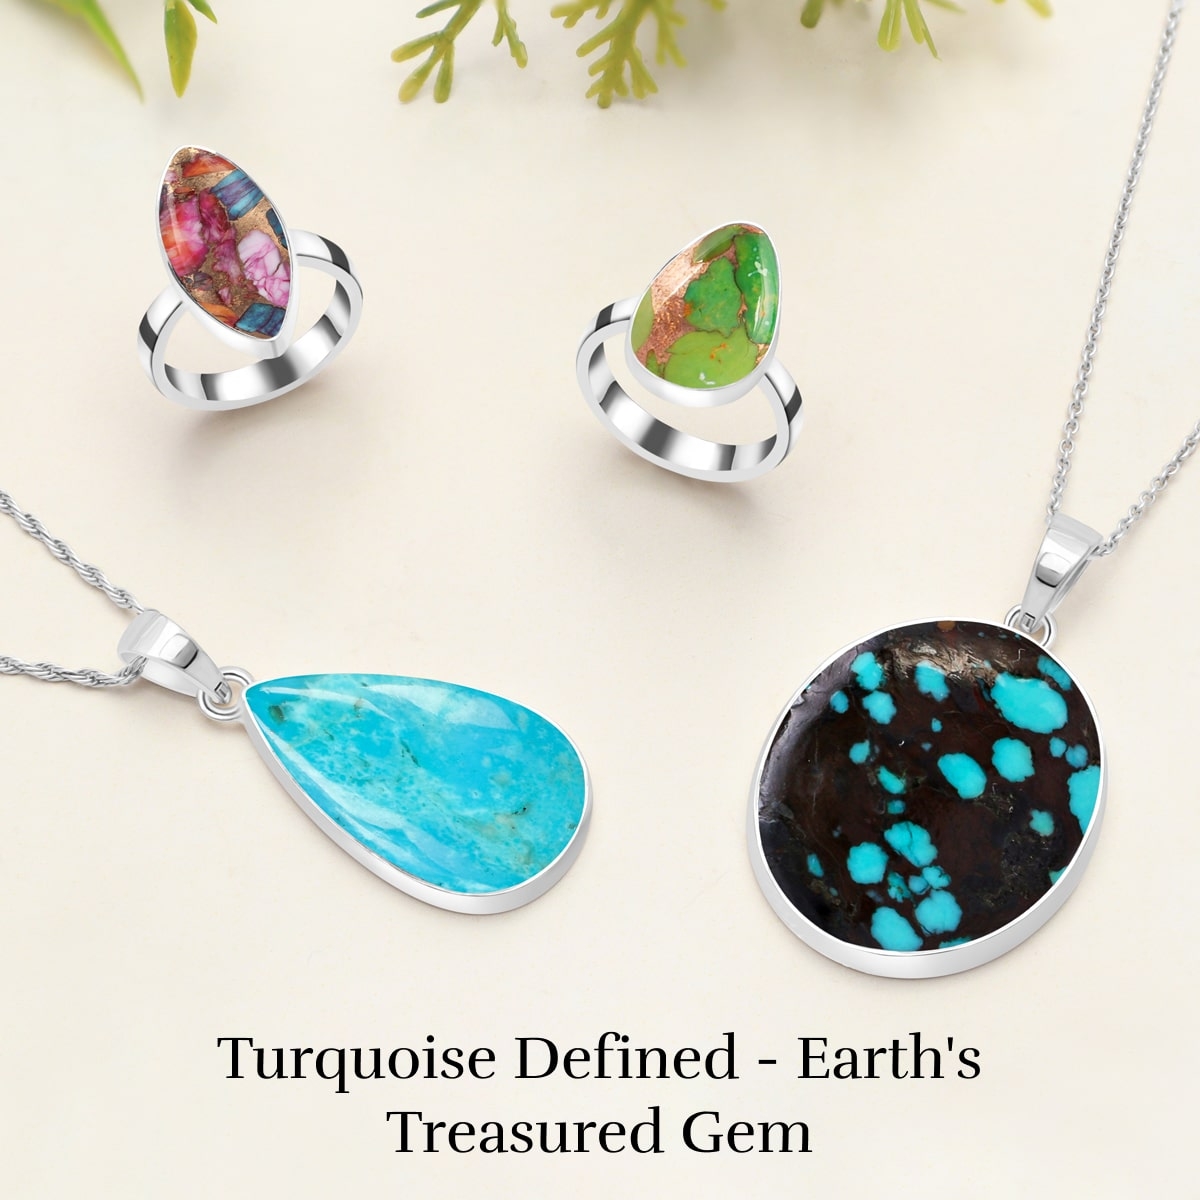 What is Turquoise